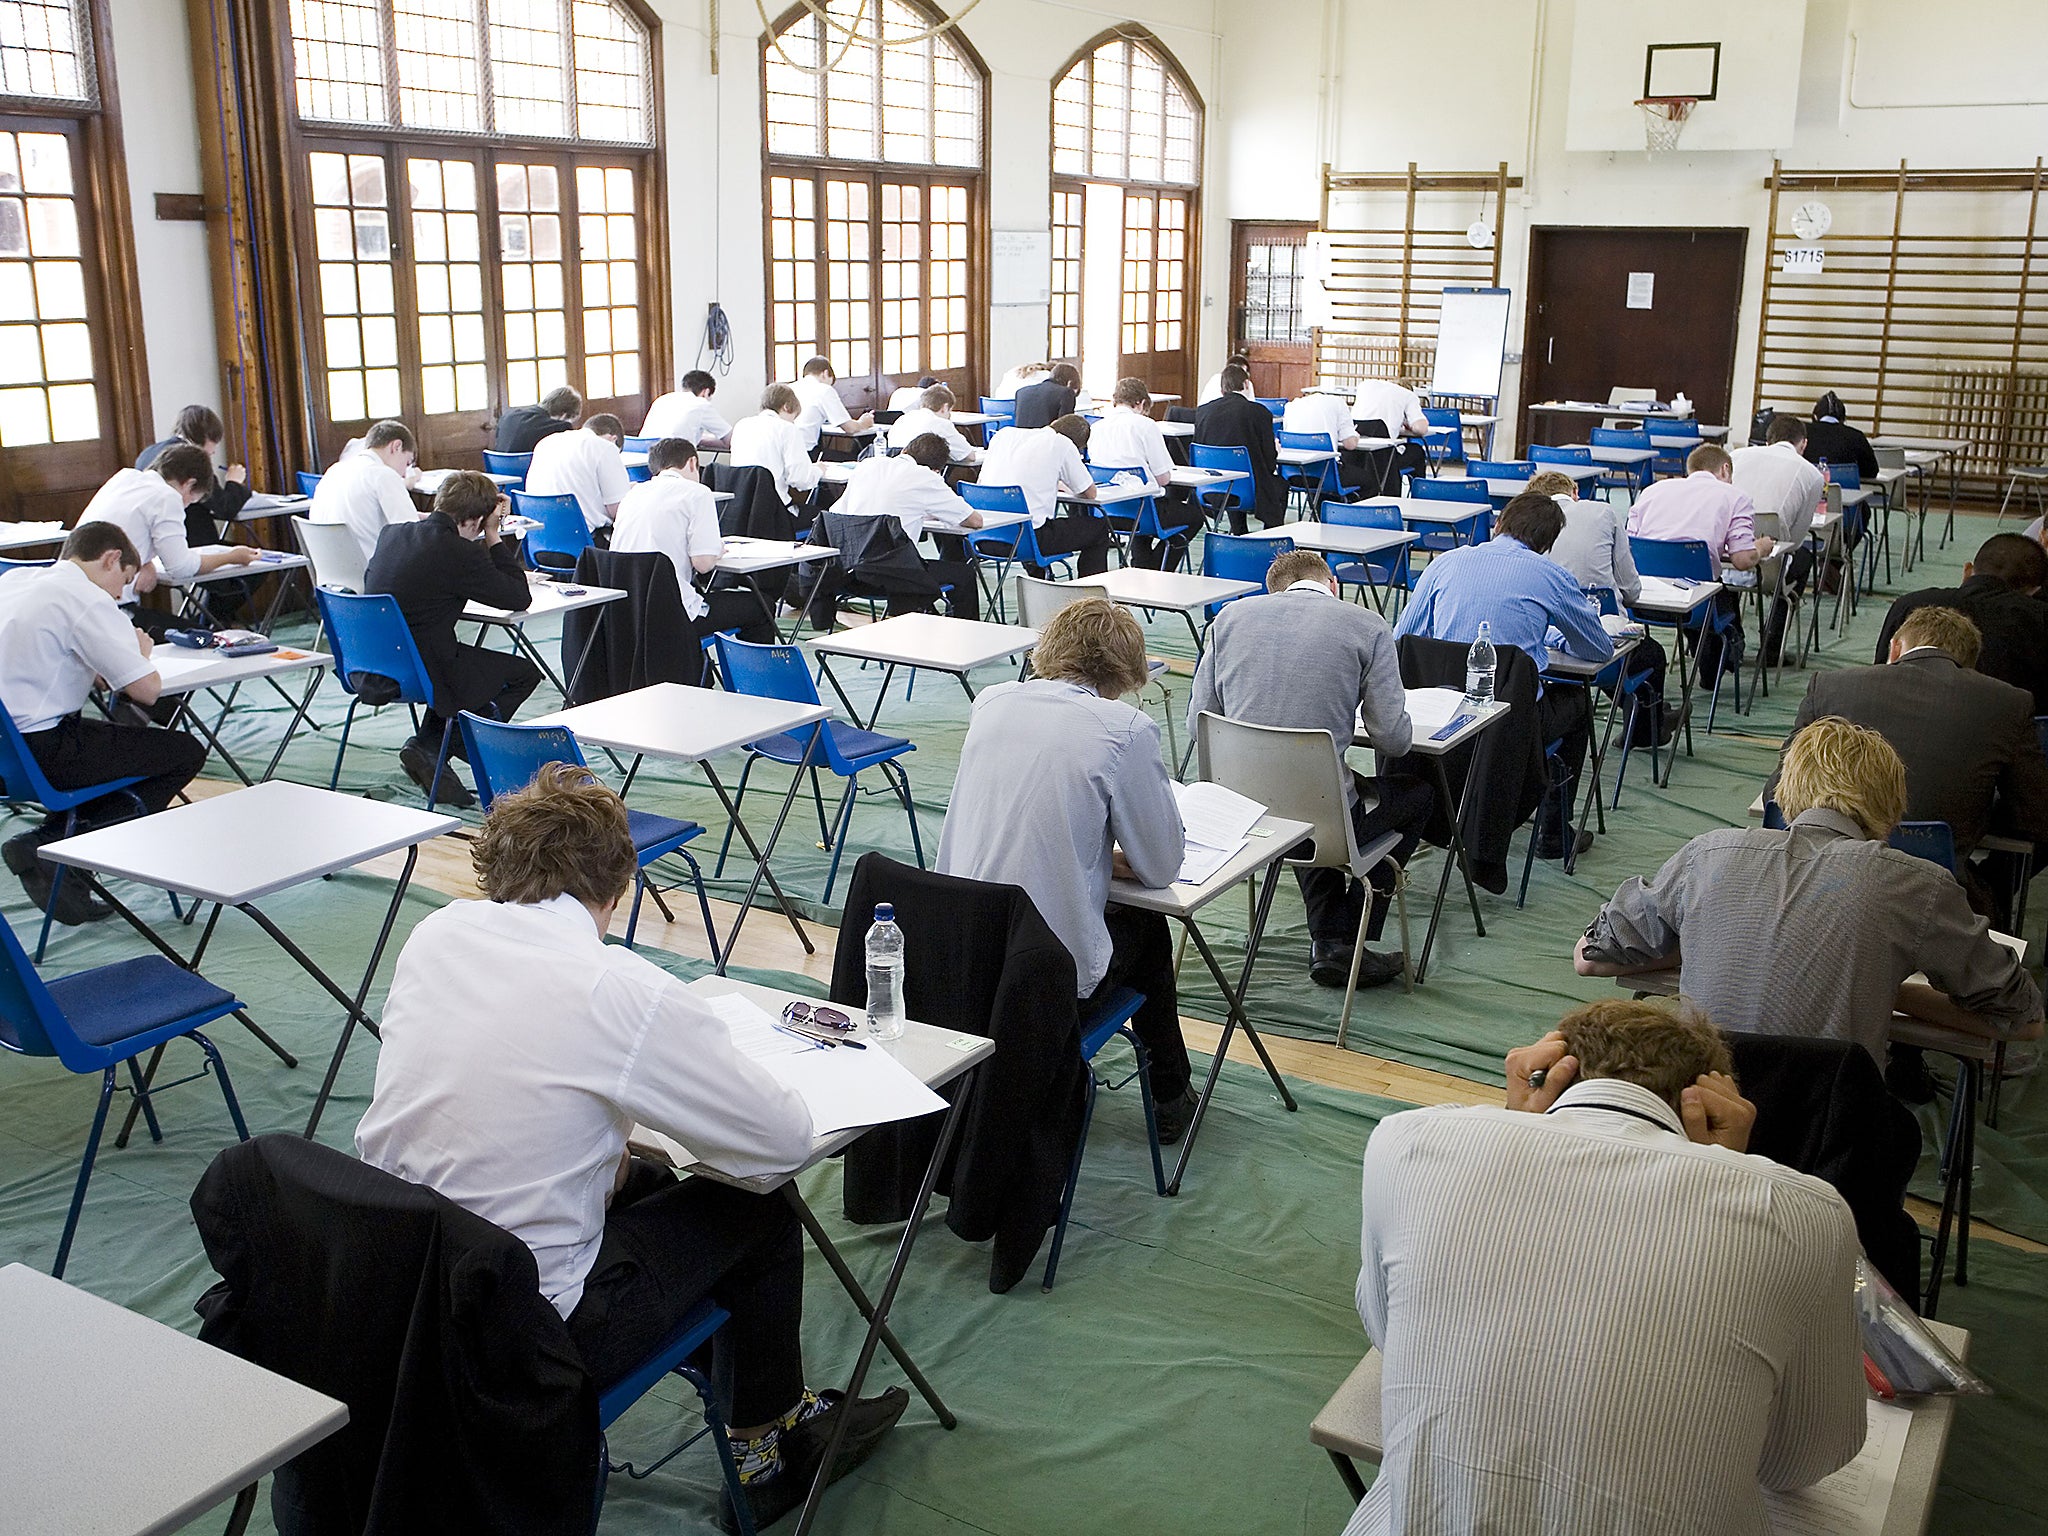 Students sitting exams in secondary school